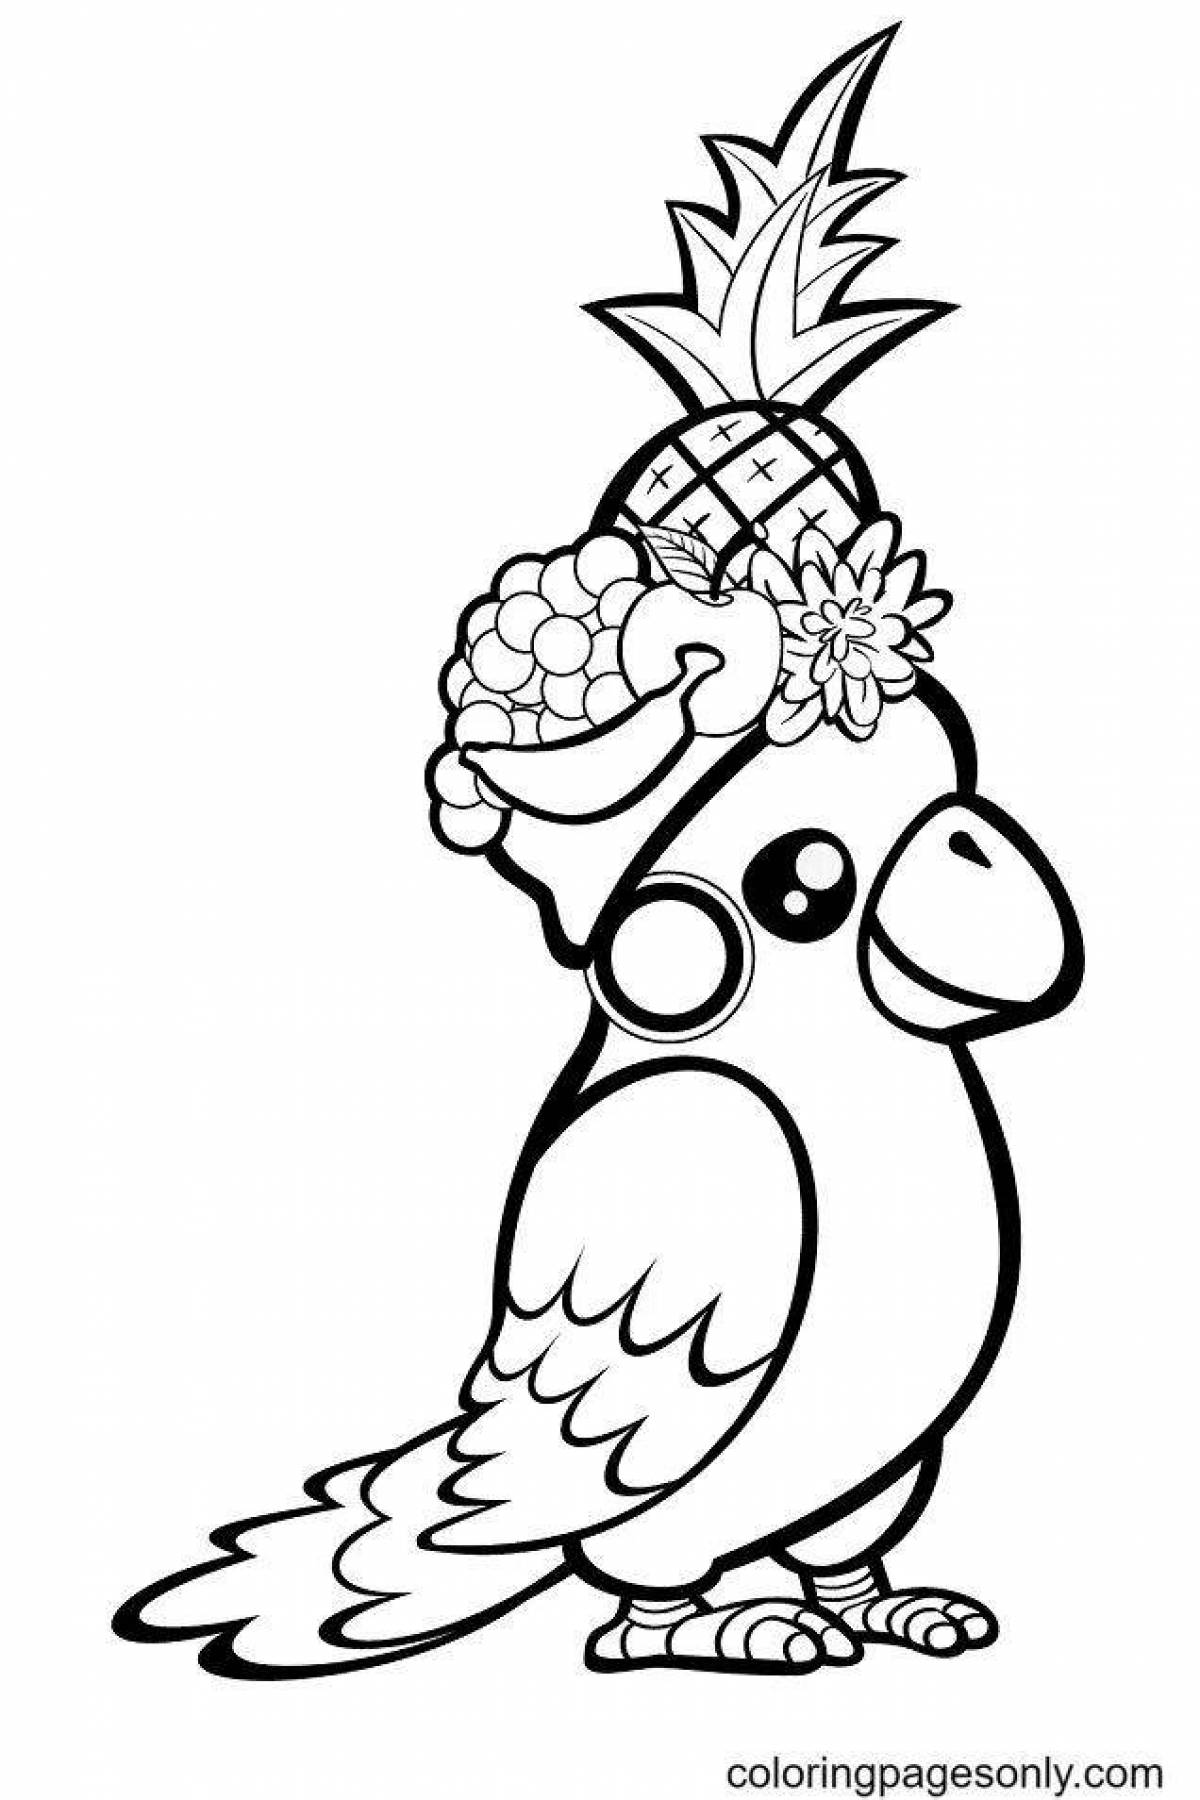 Adorable parrot coloring book for kids